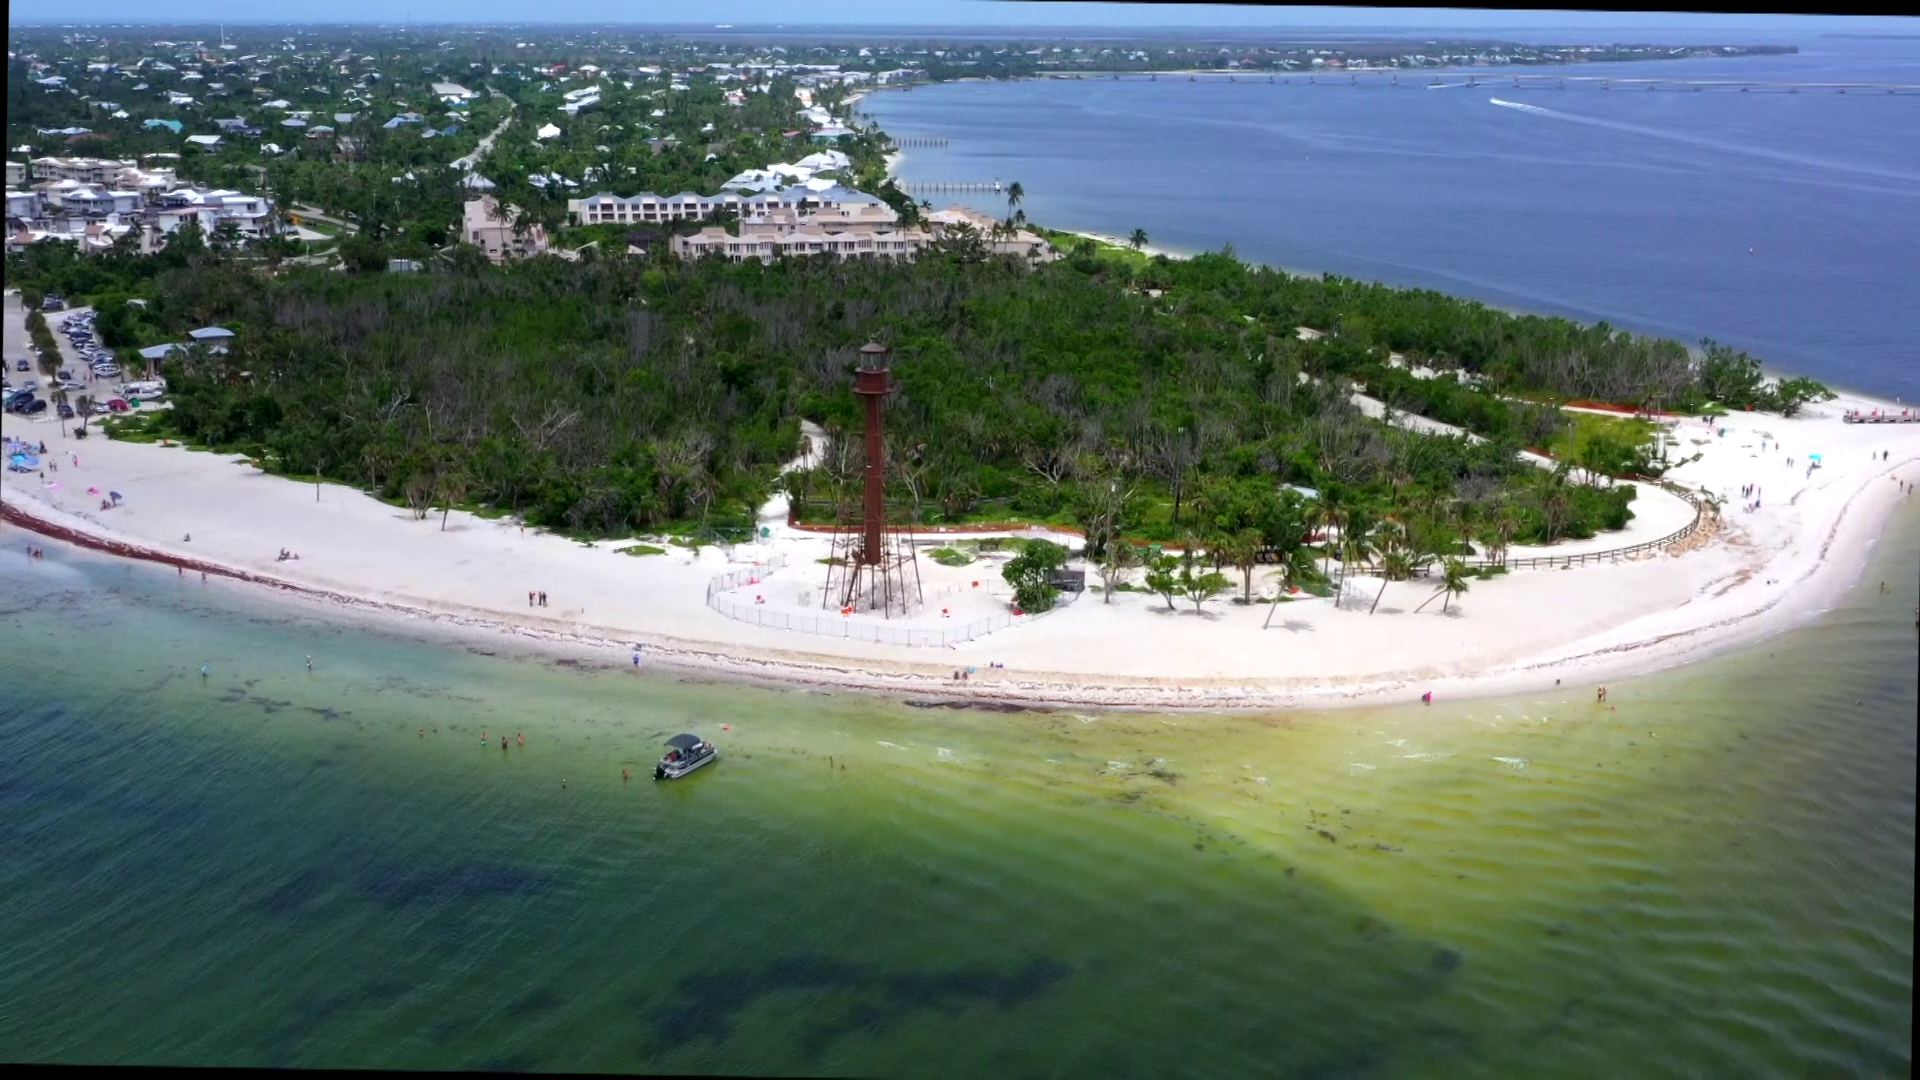 Sanibel resort day passes hope to get more business on the island